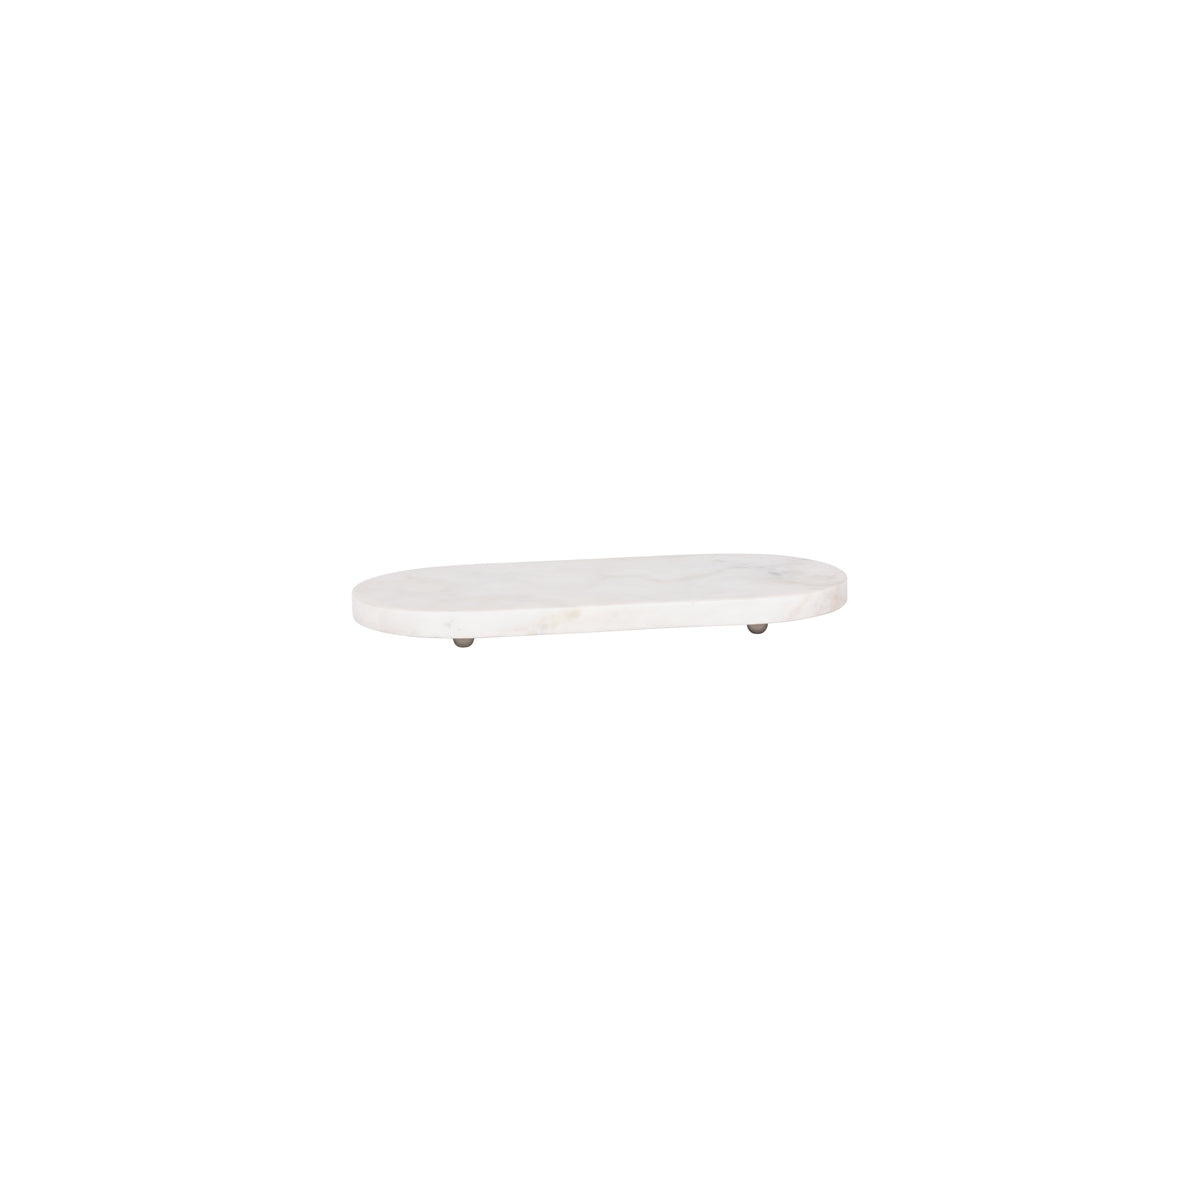 04727 Chef Inox Serve White Marble Oval Board with Small Metal Feet 365x170mm Tomkin Australia Hospitality Supplies